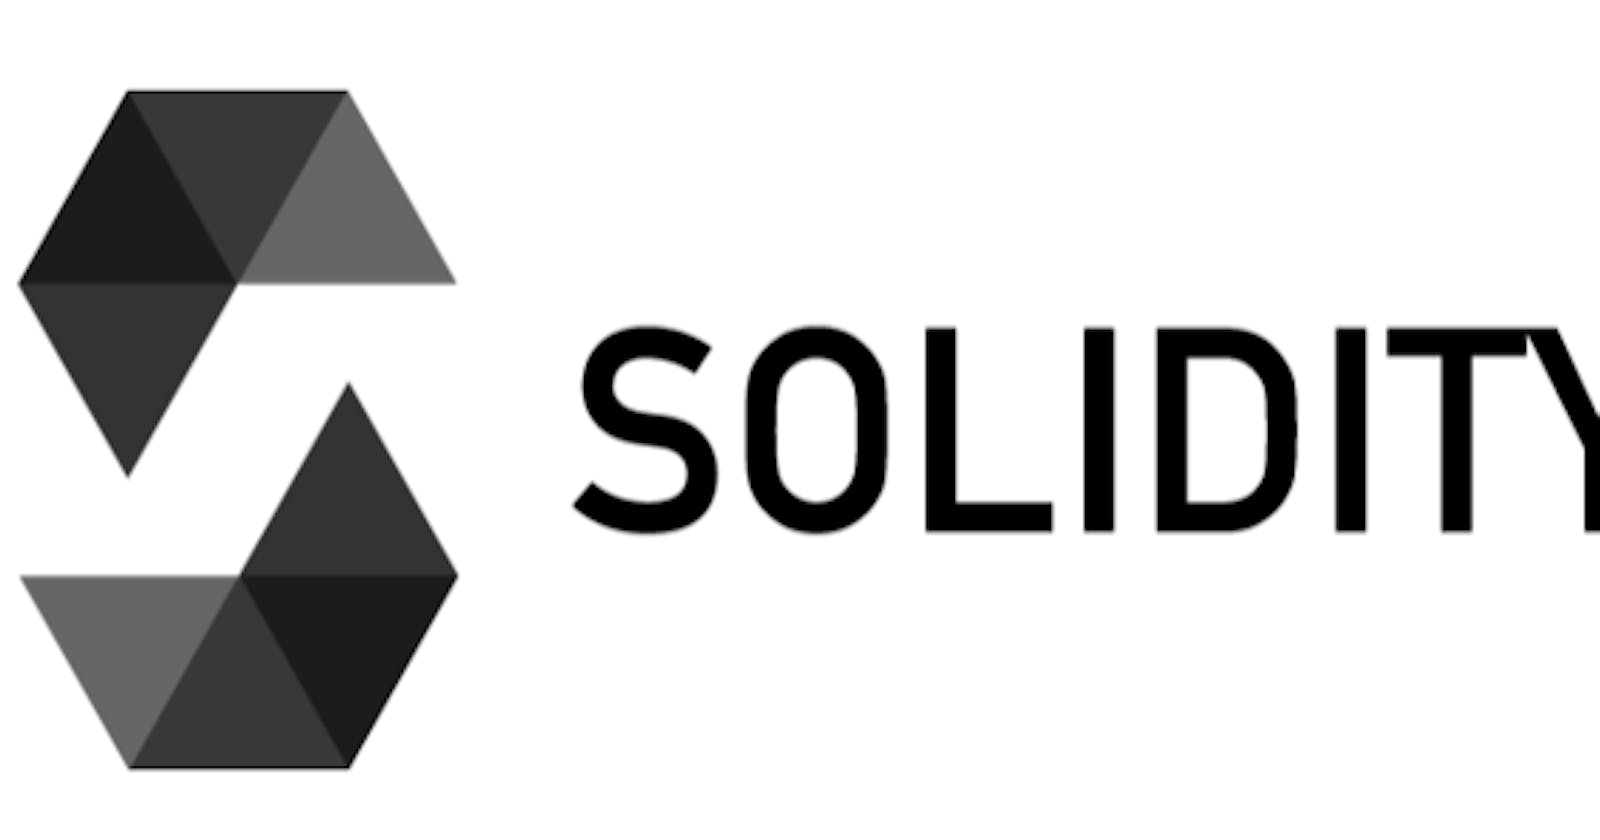 Day 3 of #30DaysOfWeb3 : Lets solidify Solidity [Part 2]